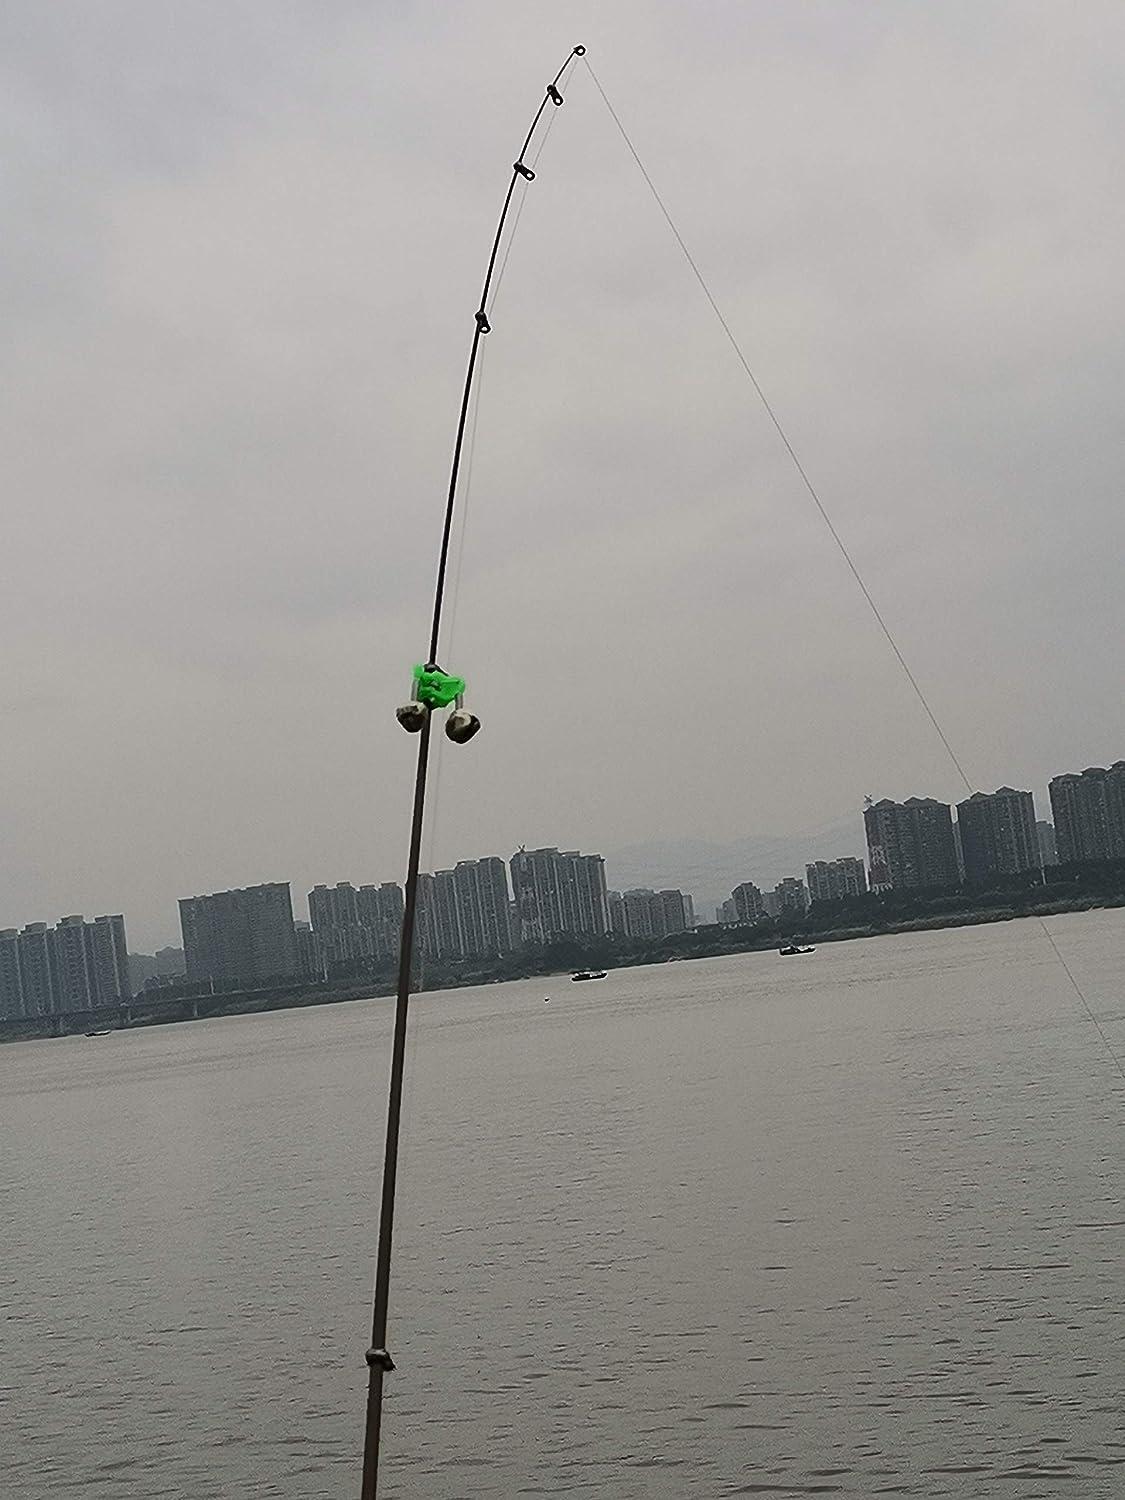 Silver Fishing Bells Are Worn On A Fishing Rod While Fishing